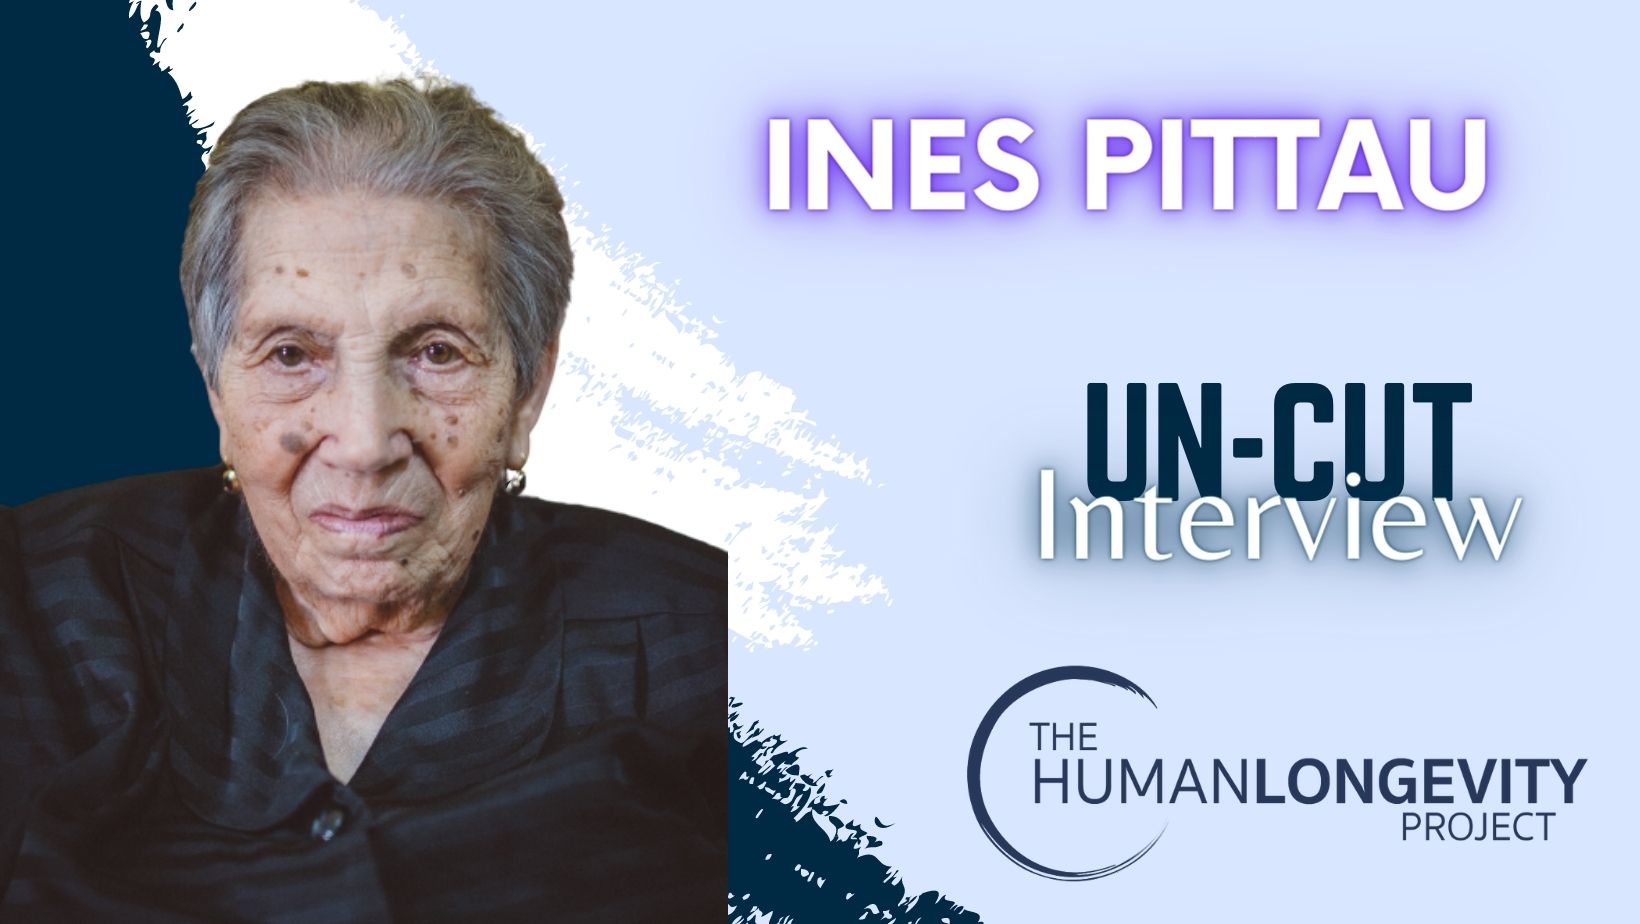 Human Longevity Project Uncut Interview With Ines Pittau